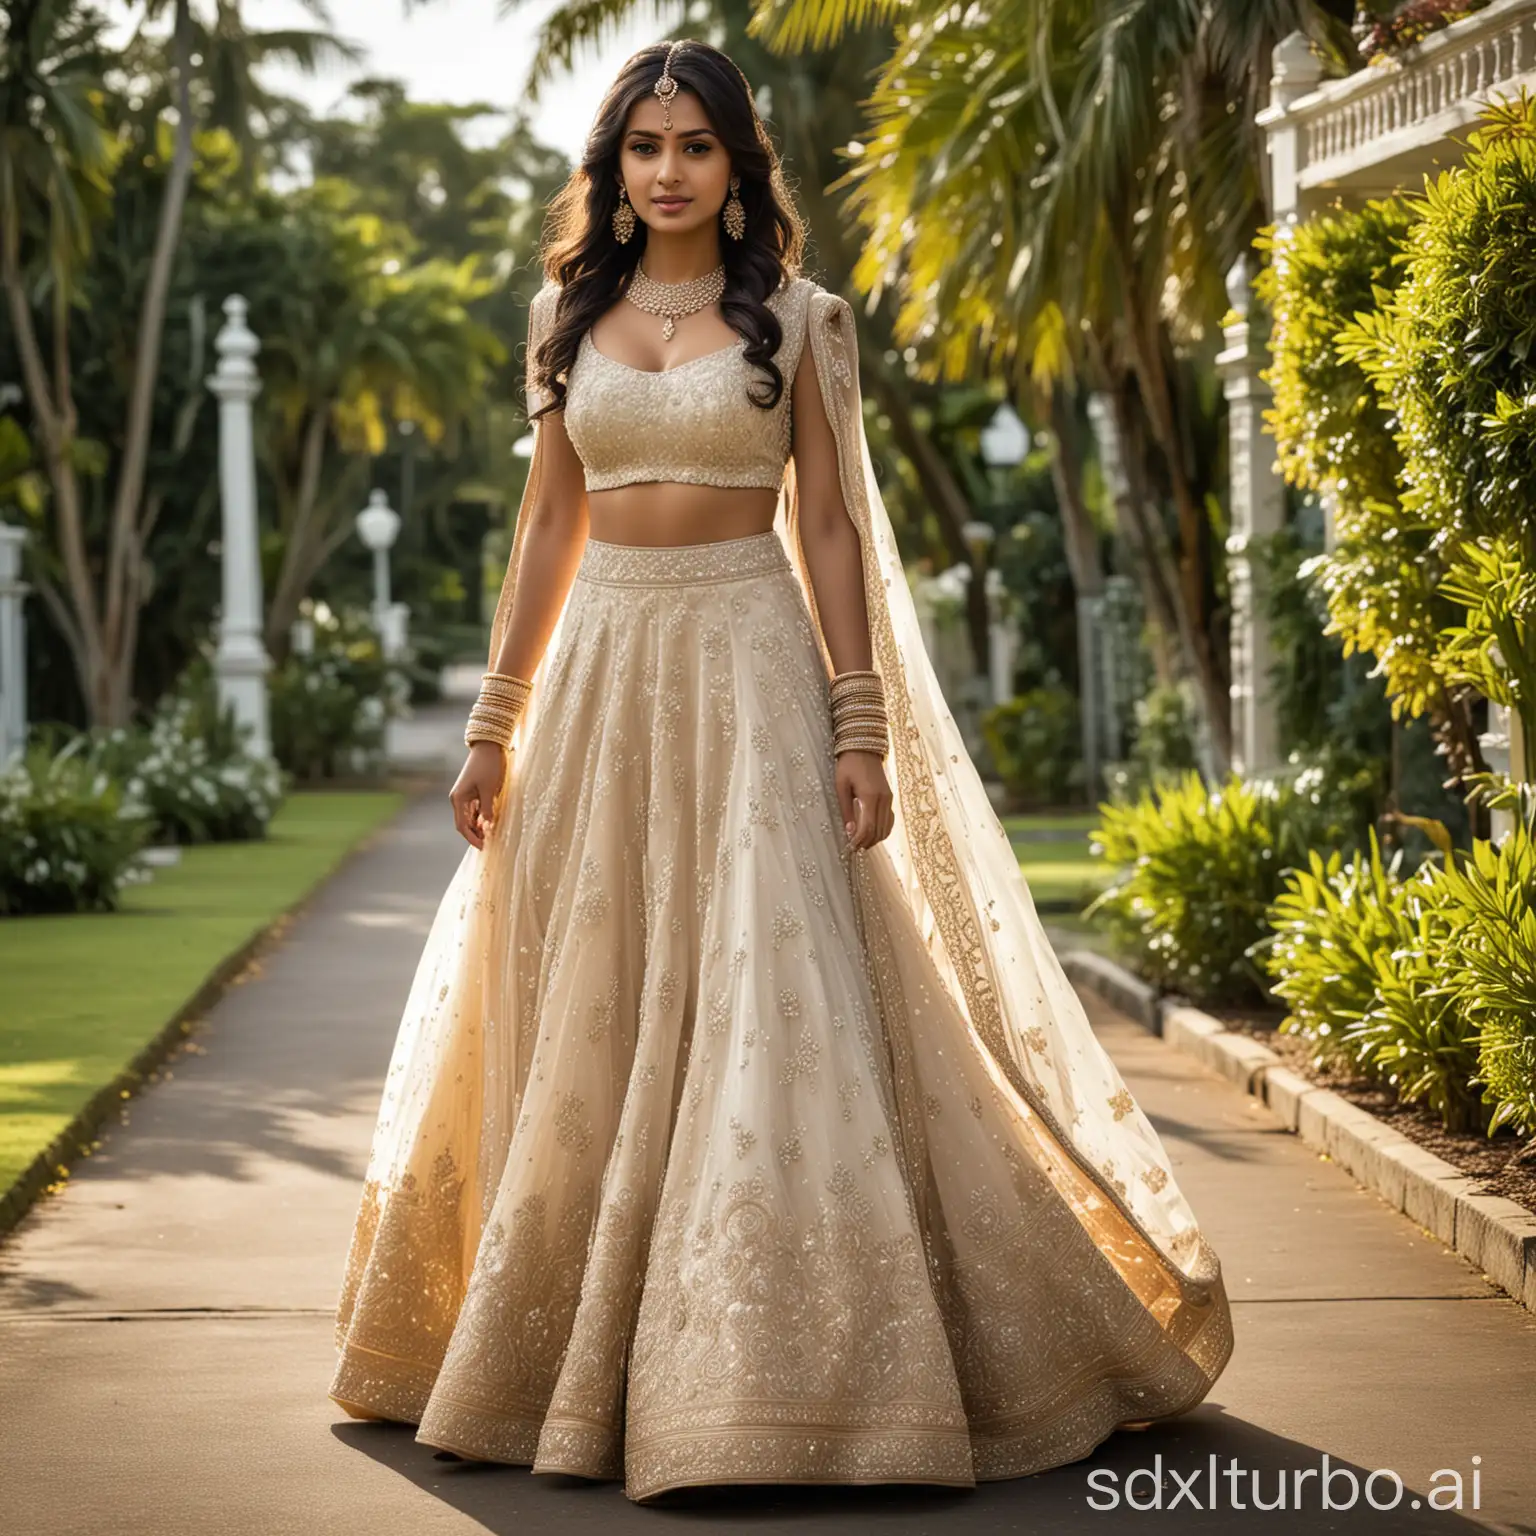 22 years old young rich indian beauty lady wearing grand bridal lehanga, pretty  walking out of a bangalow,